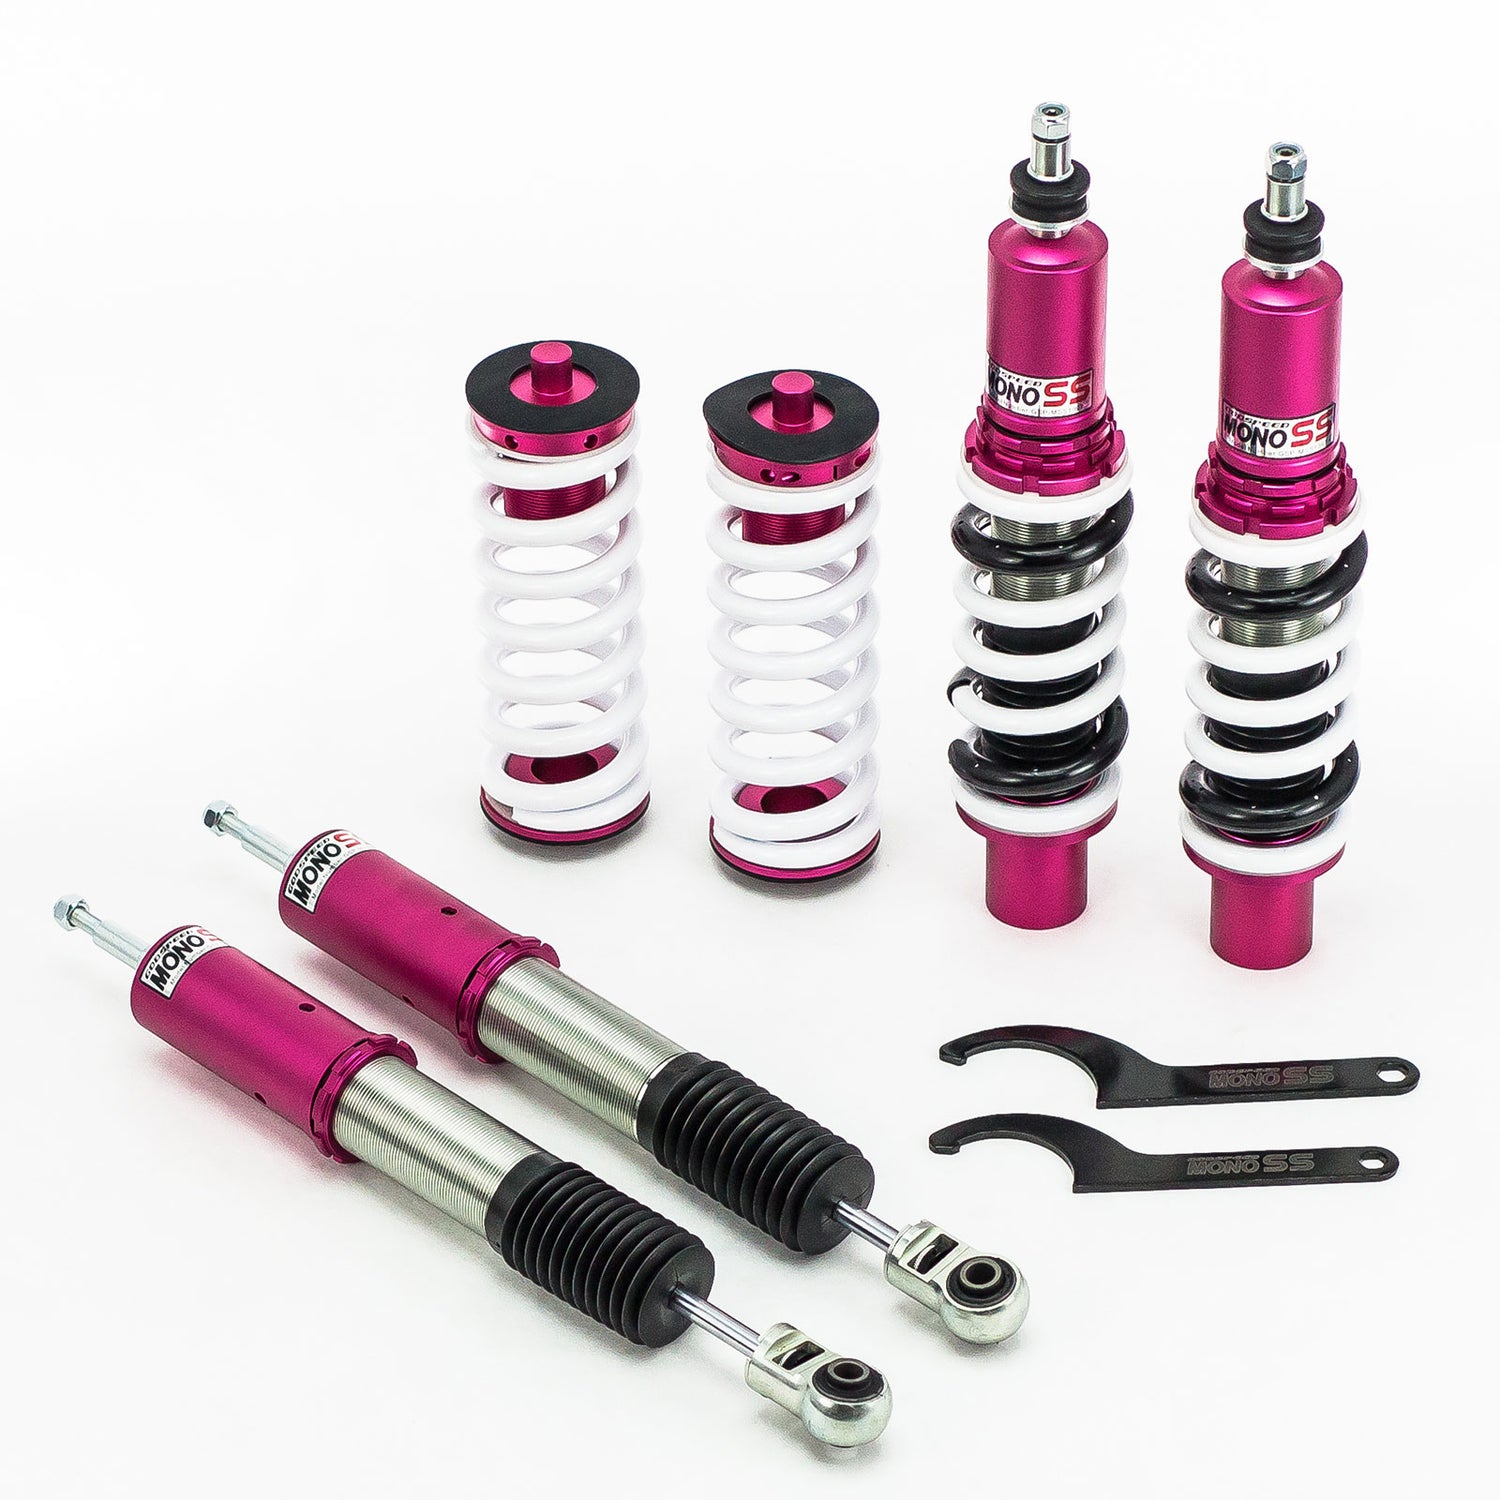 Godspeed MSS1097 MonoSS Coilover Lowering Kit, Fully Adjustable, Ride Height, Spring Tension And 16 Click Damping, Audi Q5(8R) 2009-17